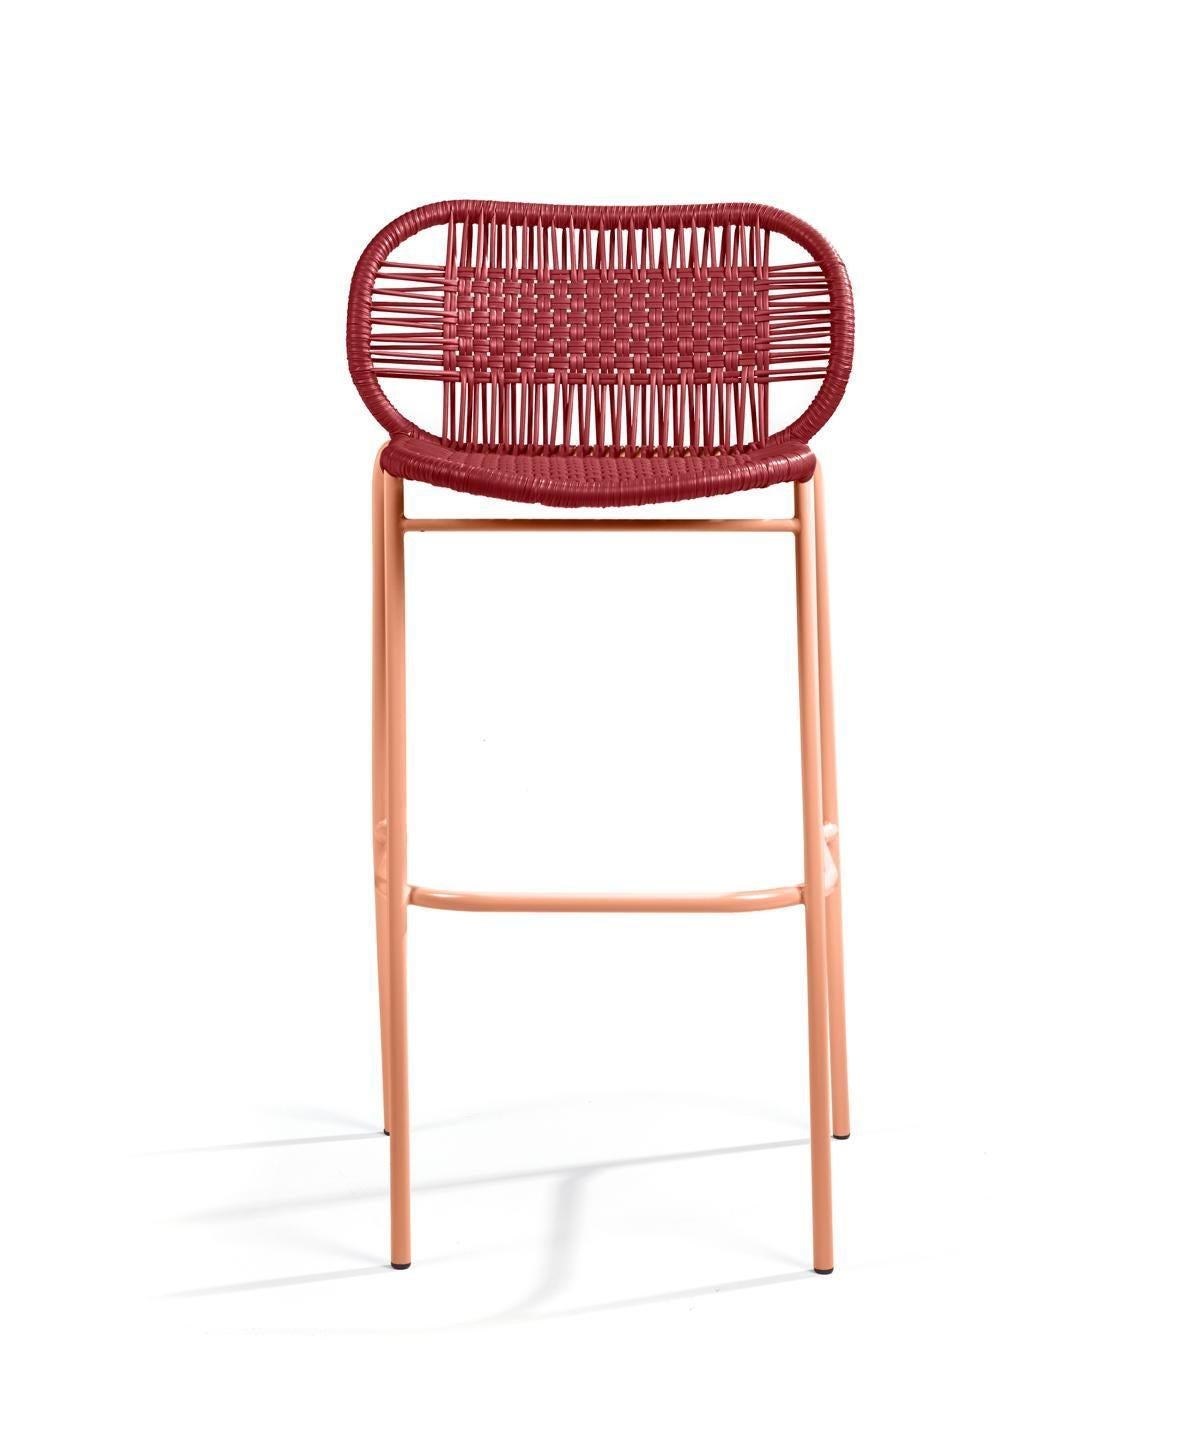 Design and inspiration
The Cielo Bar Stool is a light and versatile design by Sebastian Herkner. It’s ready for indoor and outdoor use and will spruce up bar counters at home or in hospitality spaces. Available in various colour combinations, the